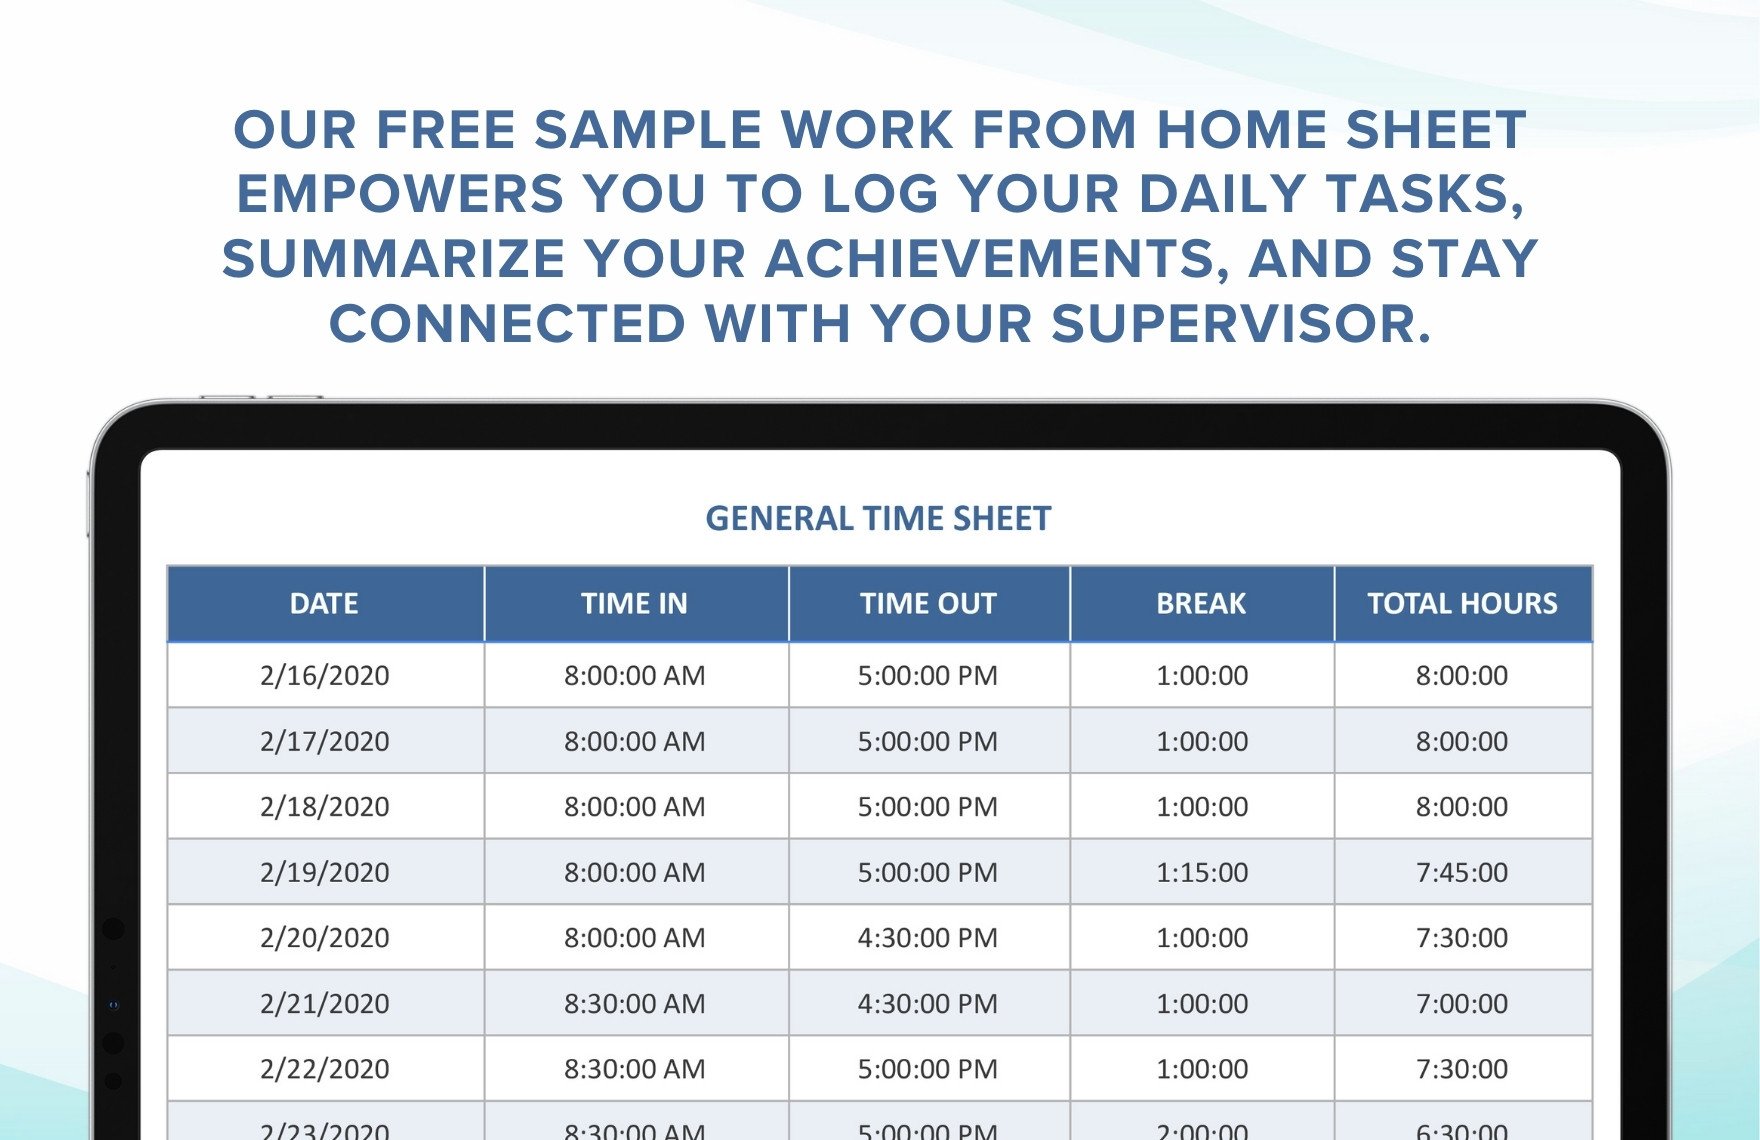 Sample Work From Home Sheet Template